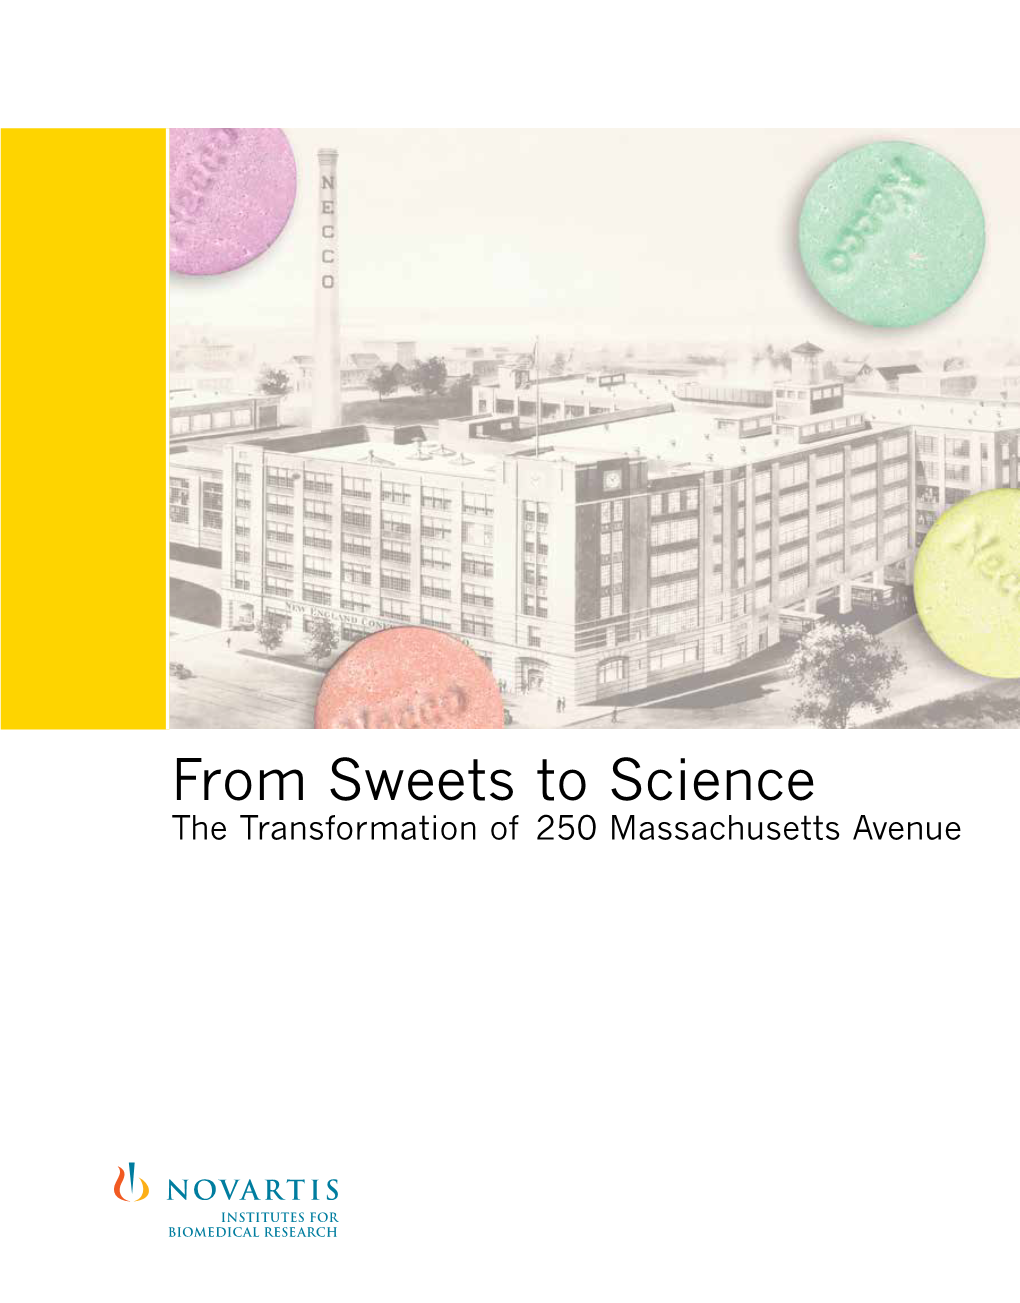 From Sweets to Science